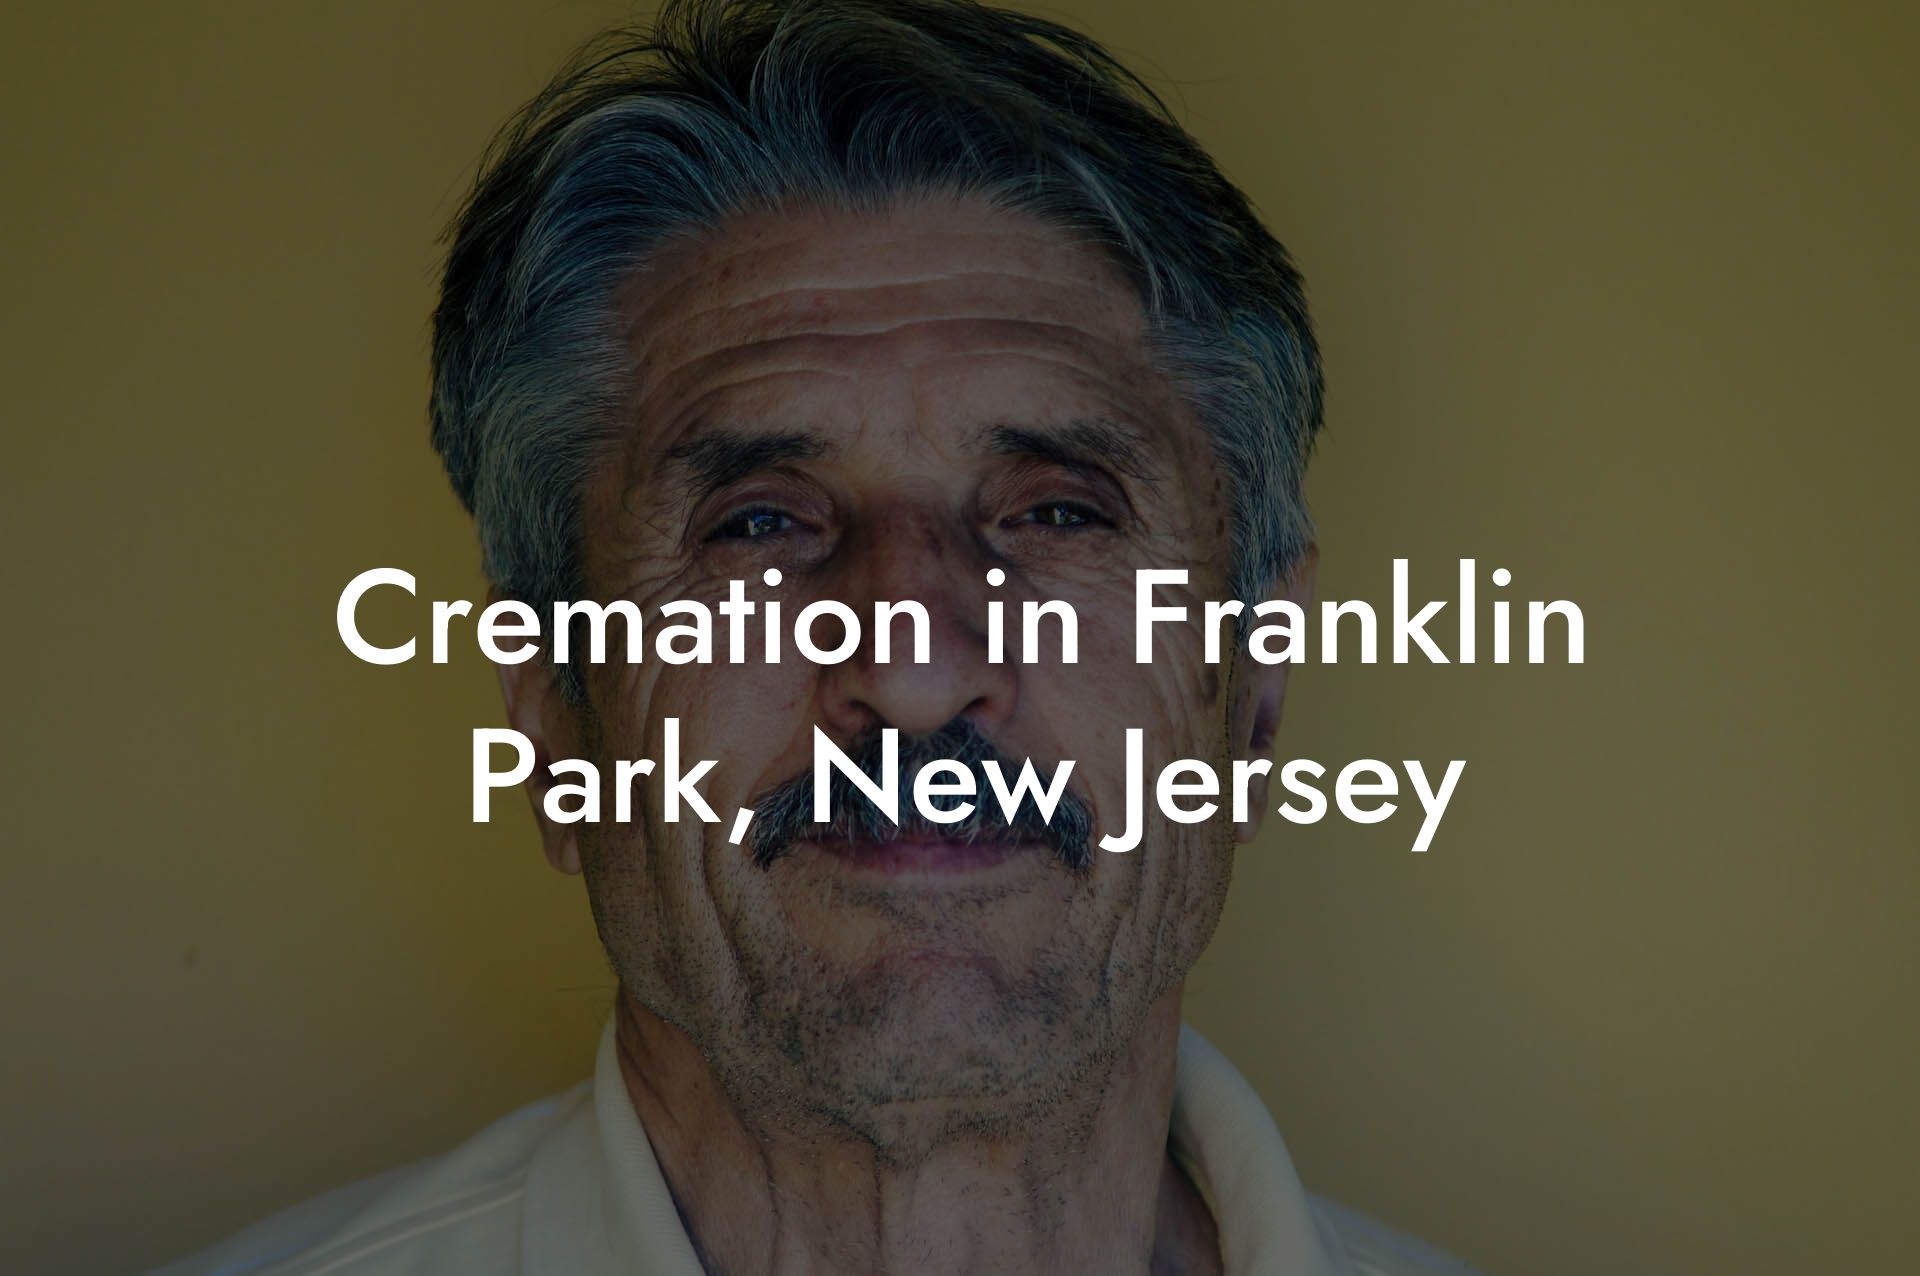 Cremation in Franklin Park, New Jersey